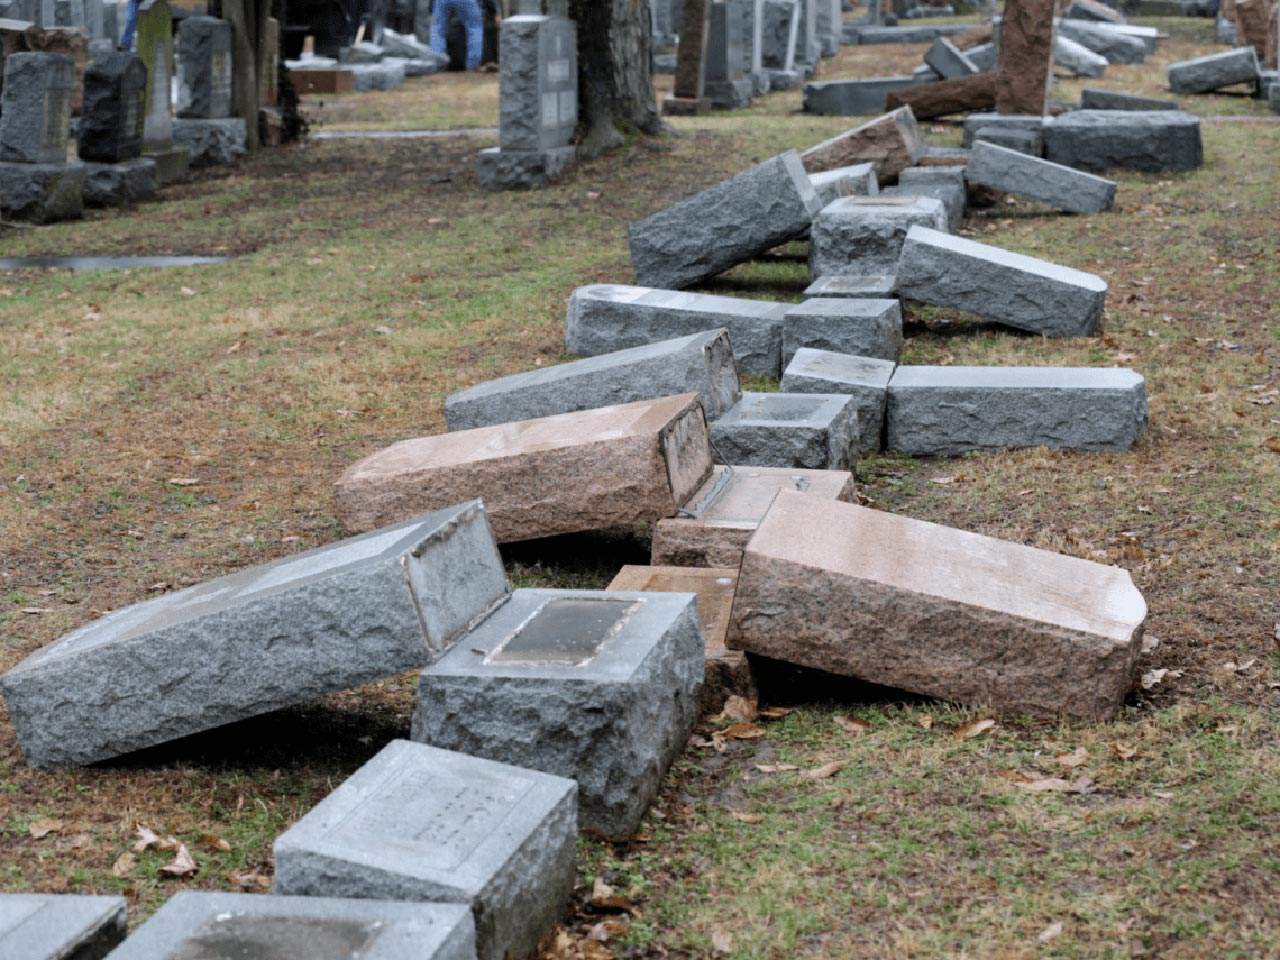 22 Photos From 2017 That Tell A Story: In the city of Saint Louis, Missouri, in the United States, Jewish graves were desecrated and more than 100 headstones were toppled in the Chesed Shel Emeth Cemetery.